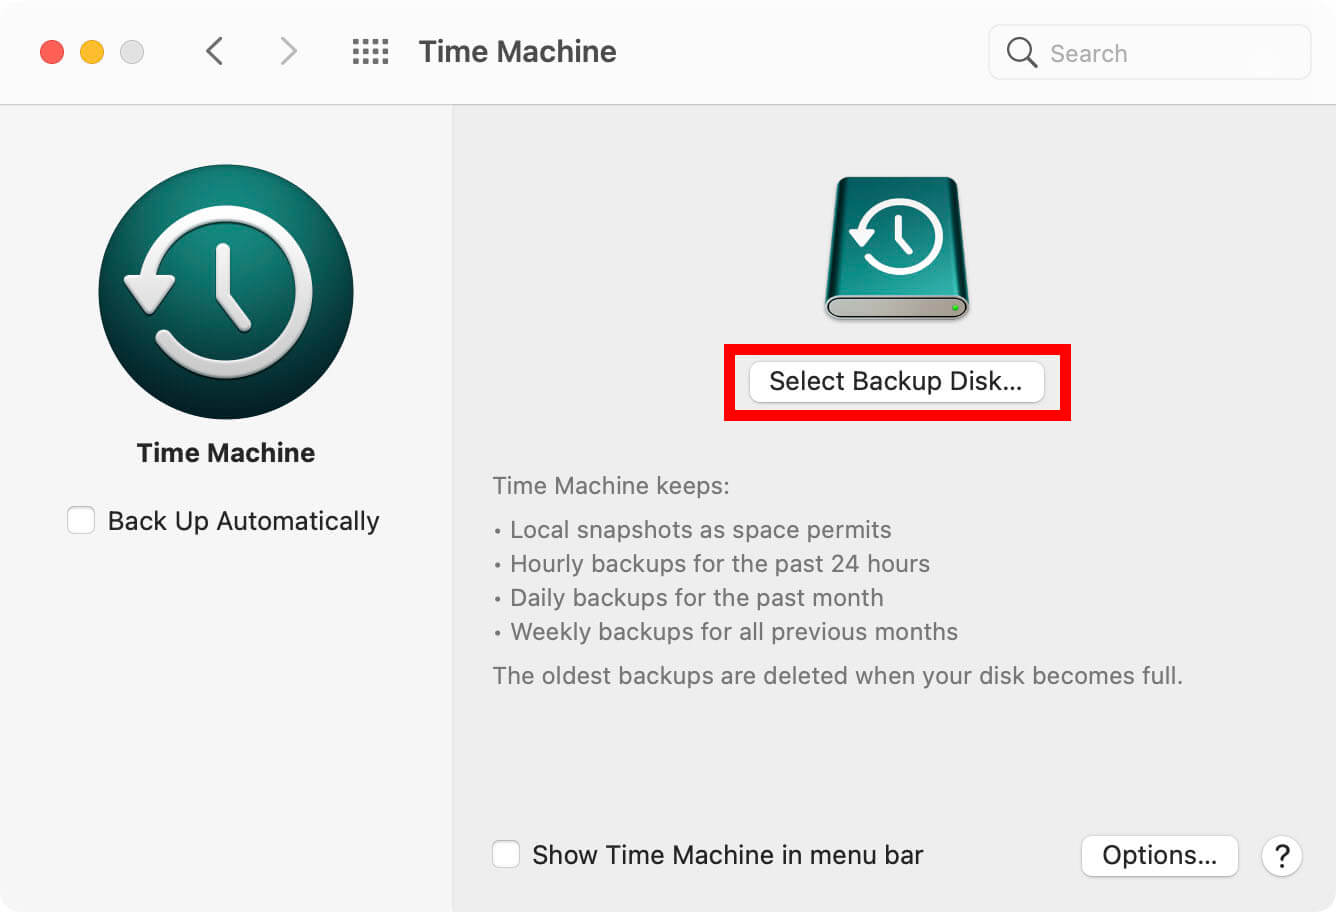 How to Use Time Machine on Mac